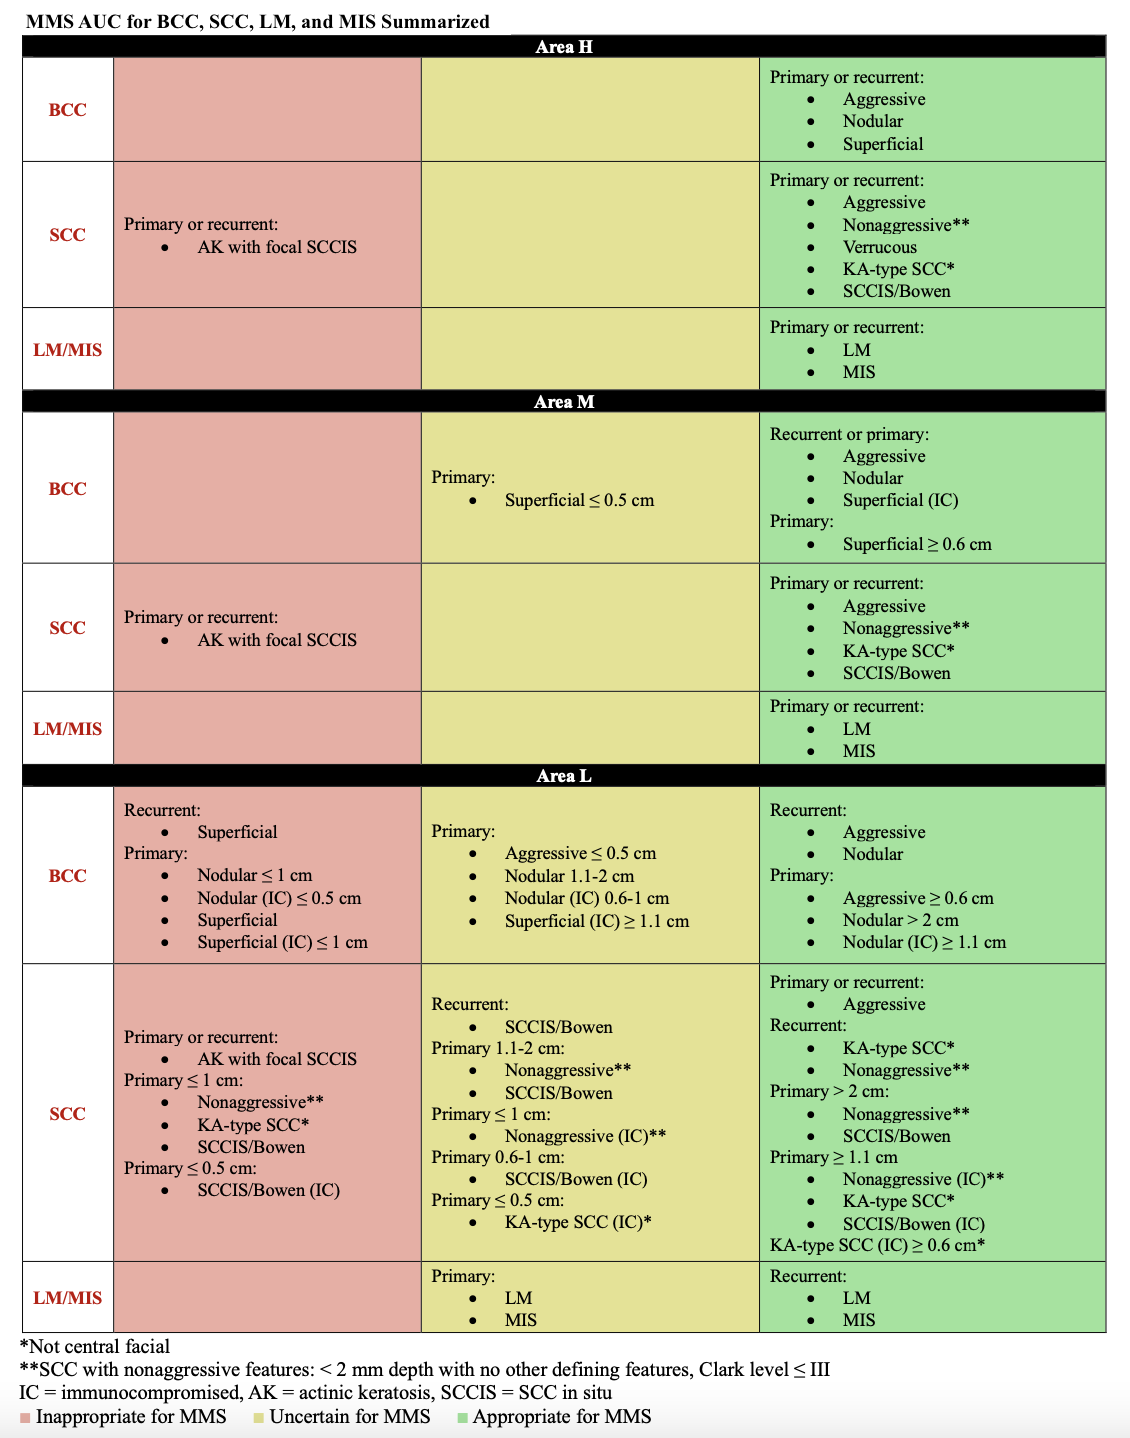 <p>Table: Summary of Mohs Microsurgery AUC for Basal Cell Carcinoma, Squamous Cell Carcinoma, Lentigo Maligna, and Melanoma in Situ